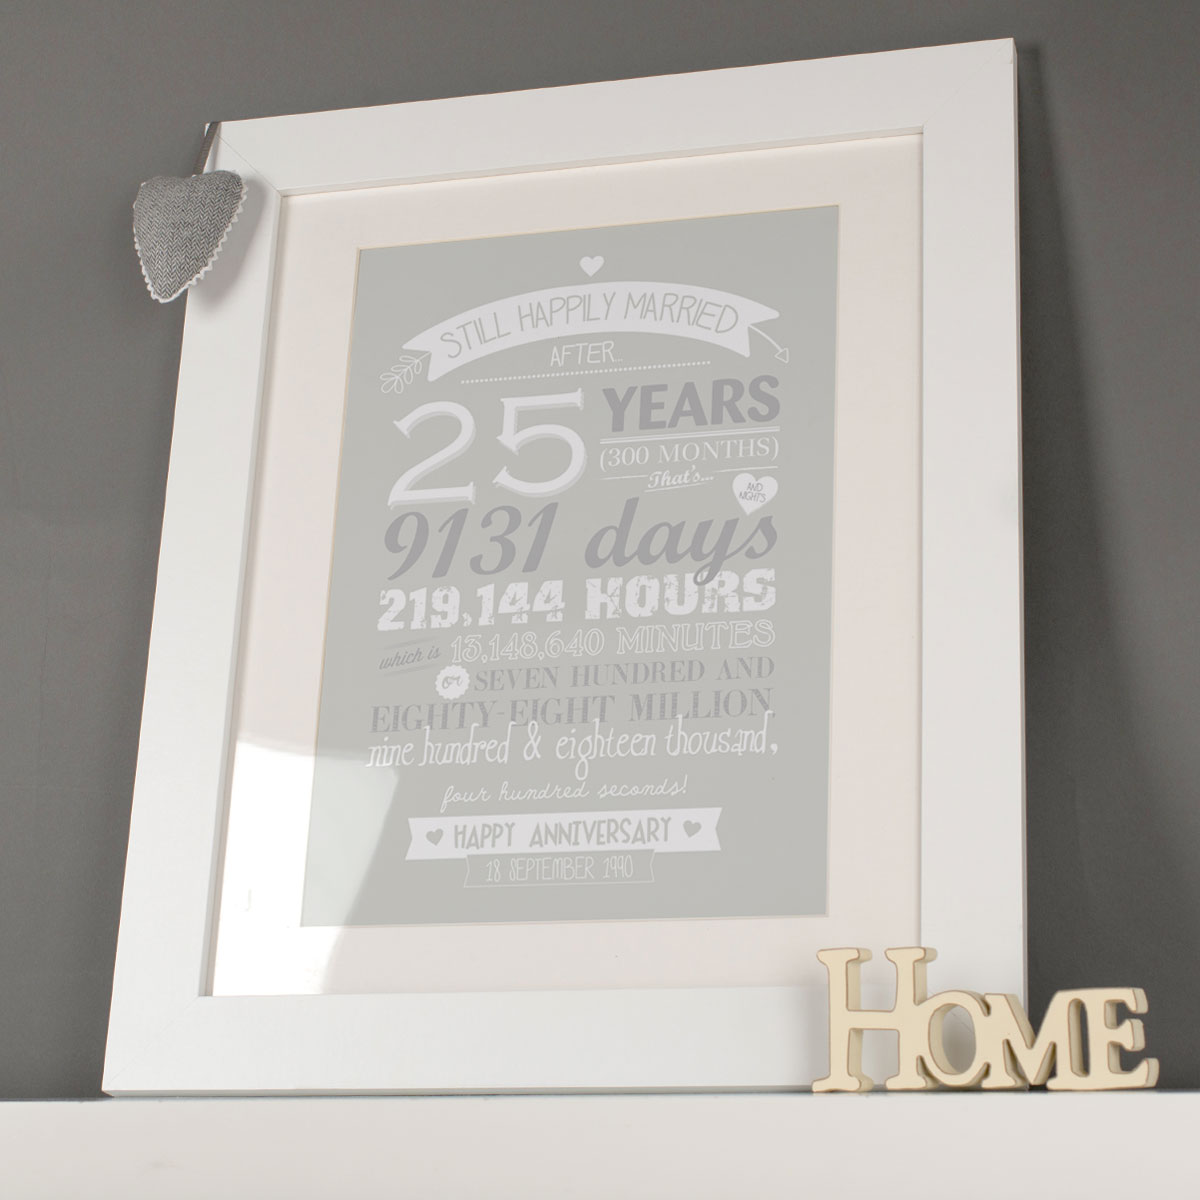 Personalised Framed Print - After 25 Years